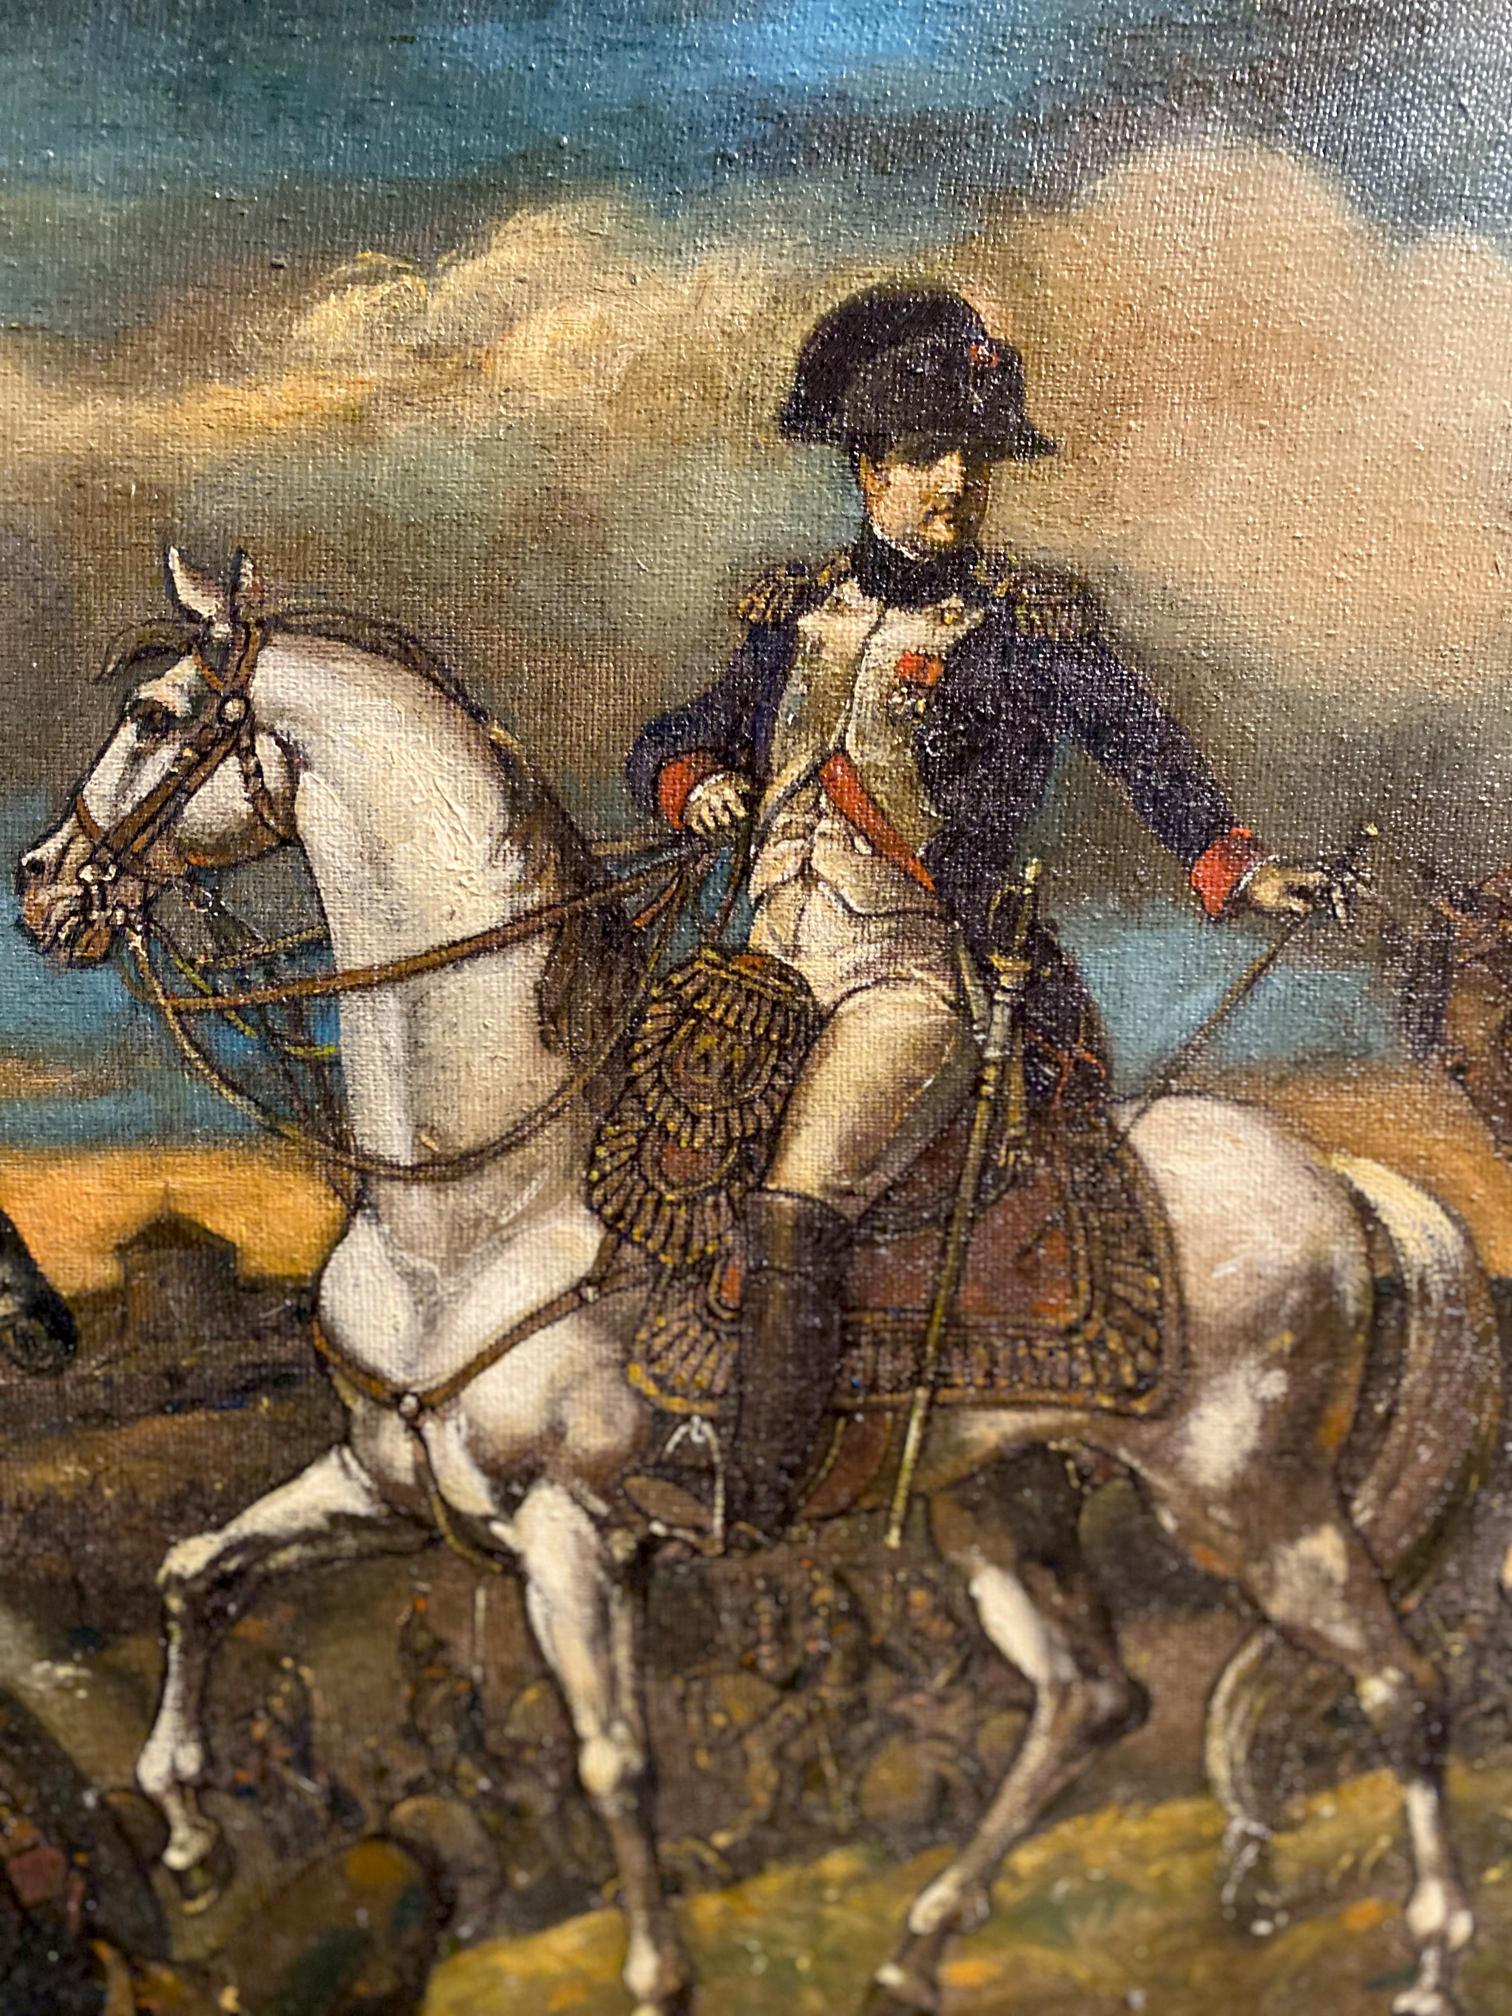 Napoleon's military campaign is depicted in Oleg Litvinov's oil painting.